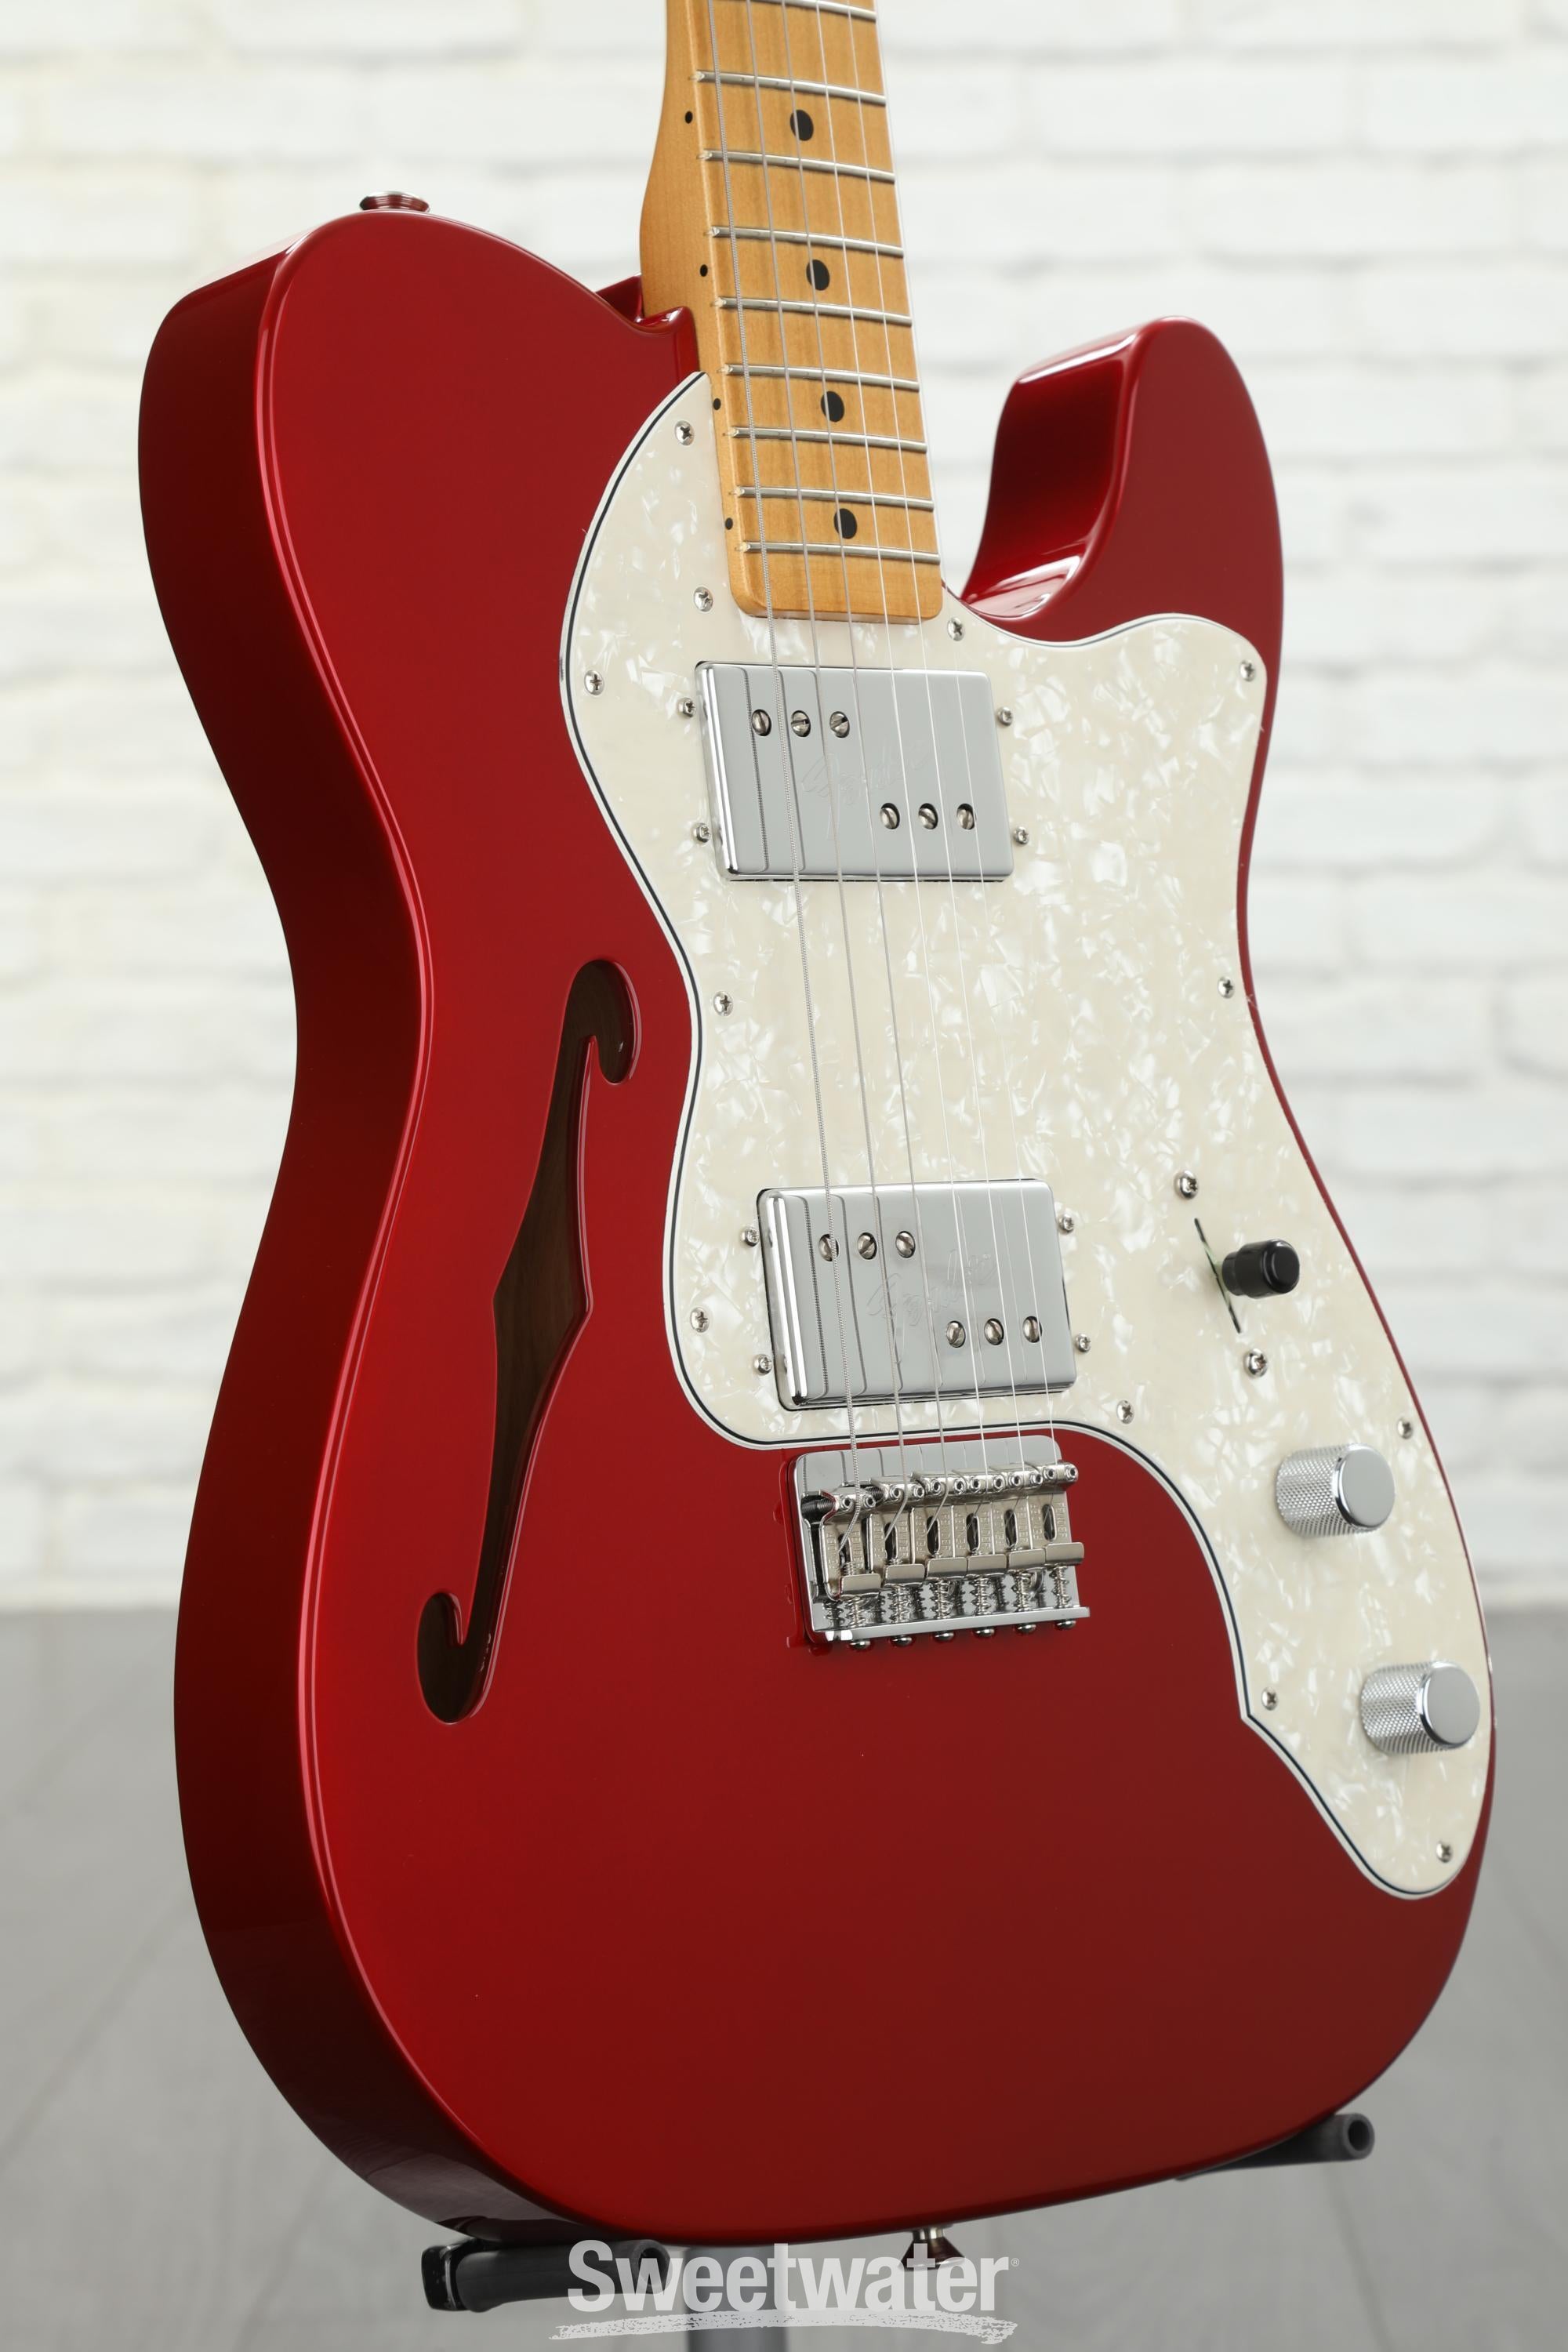 Fender Vintera '70s Telecaster Thinline - Candy Apple Red | Sweetwater